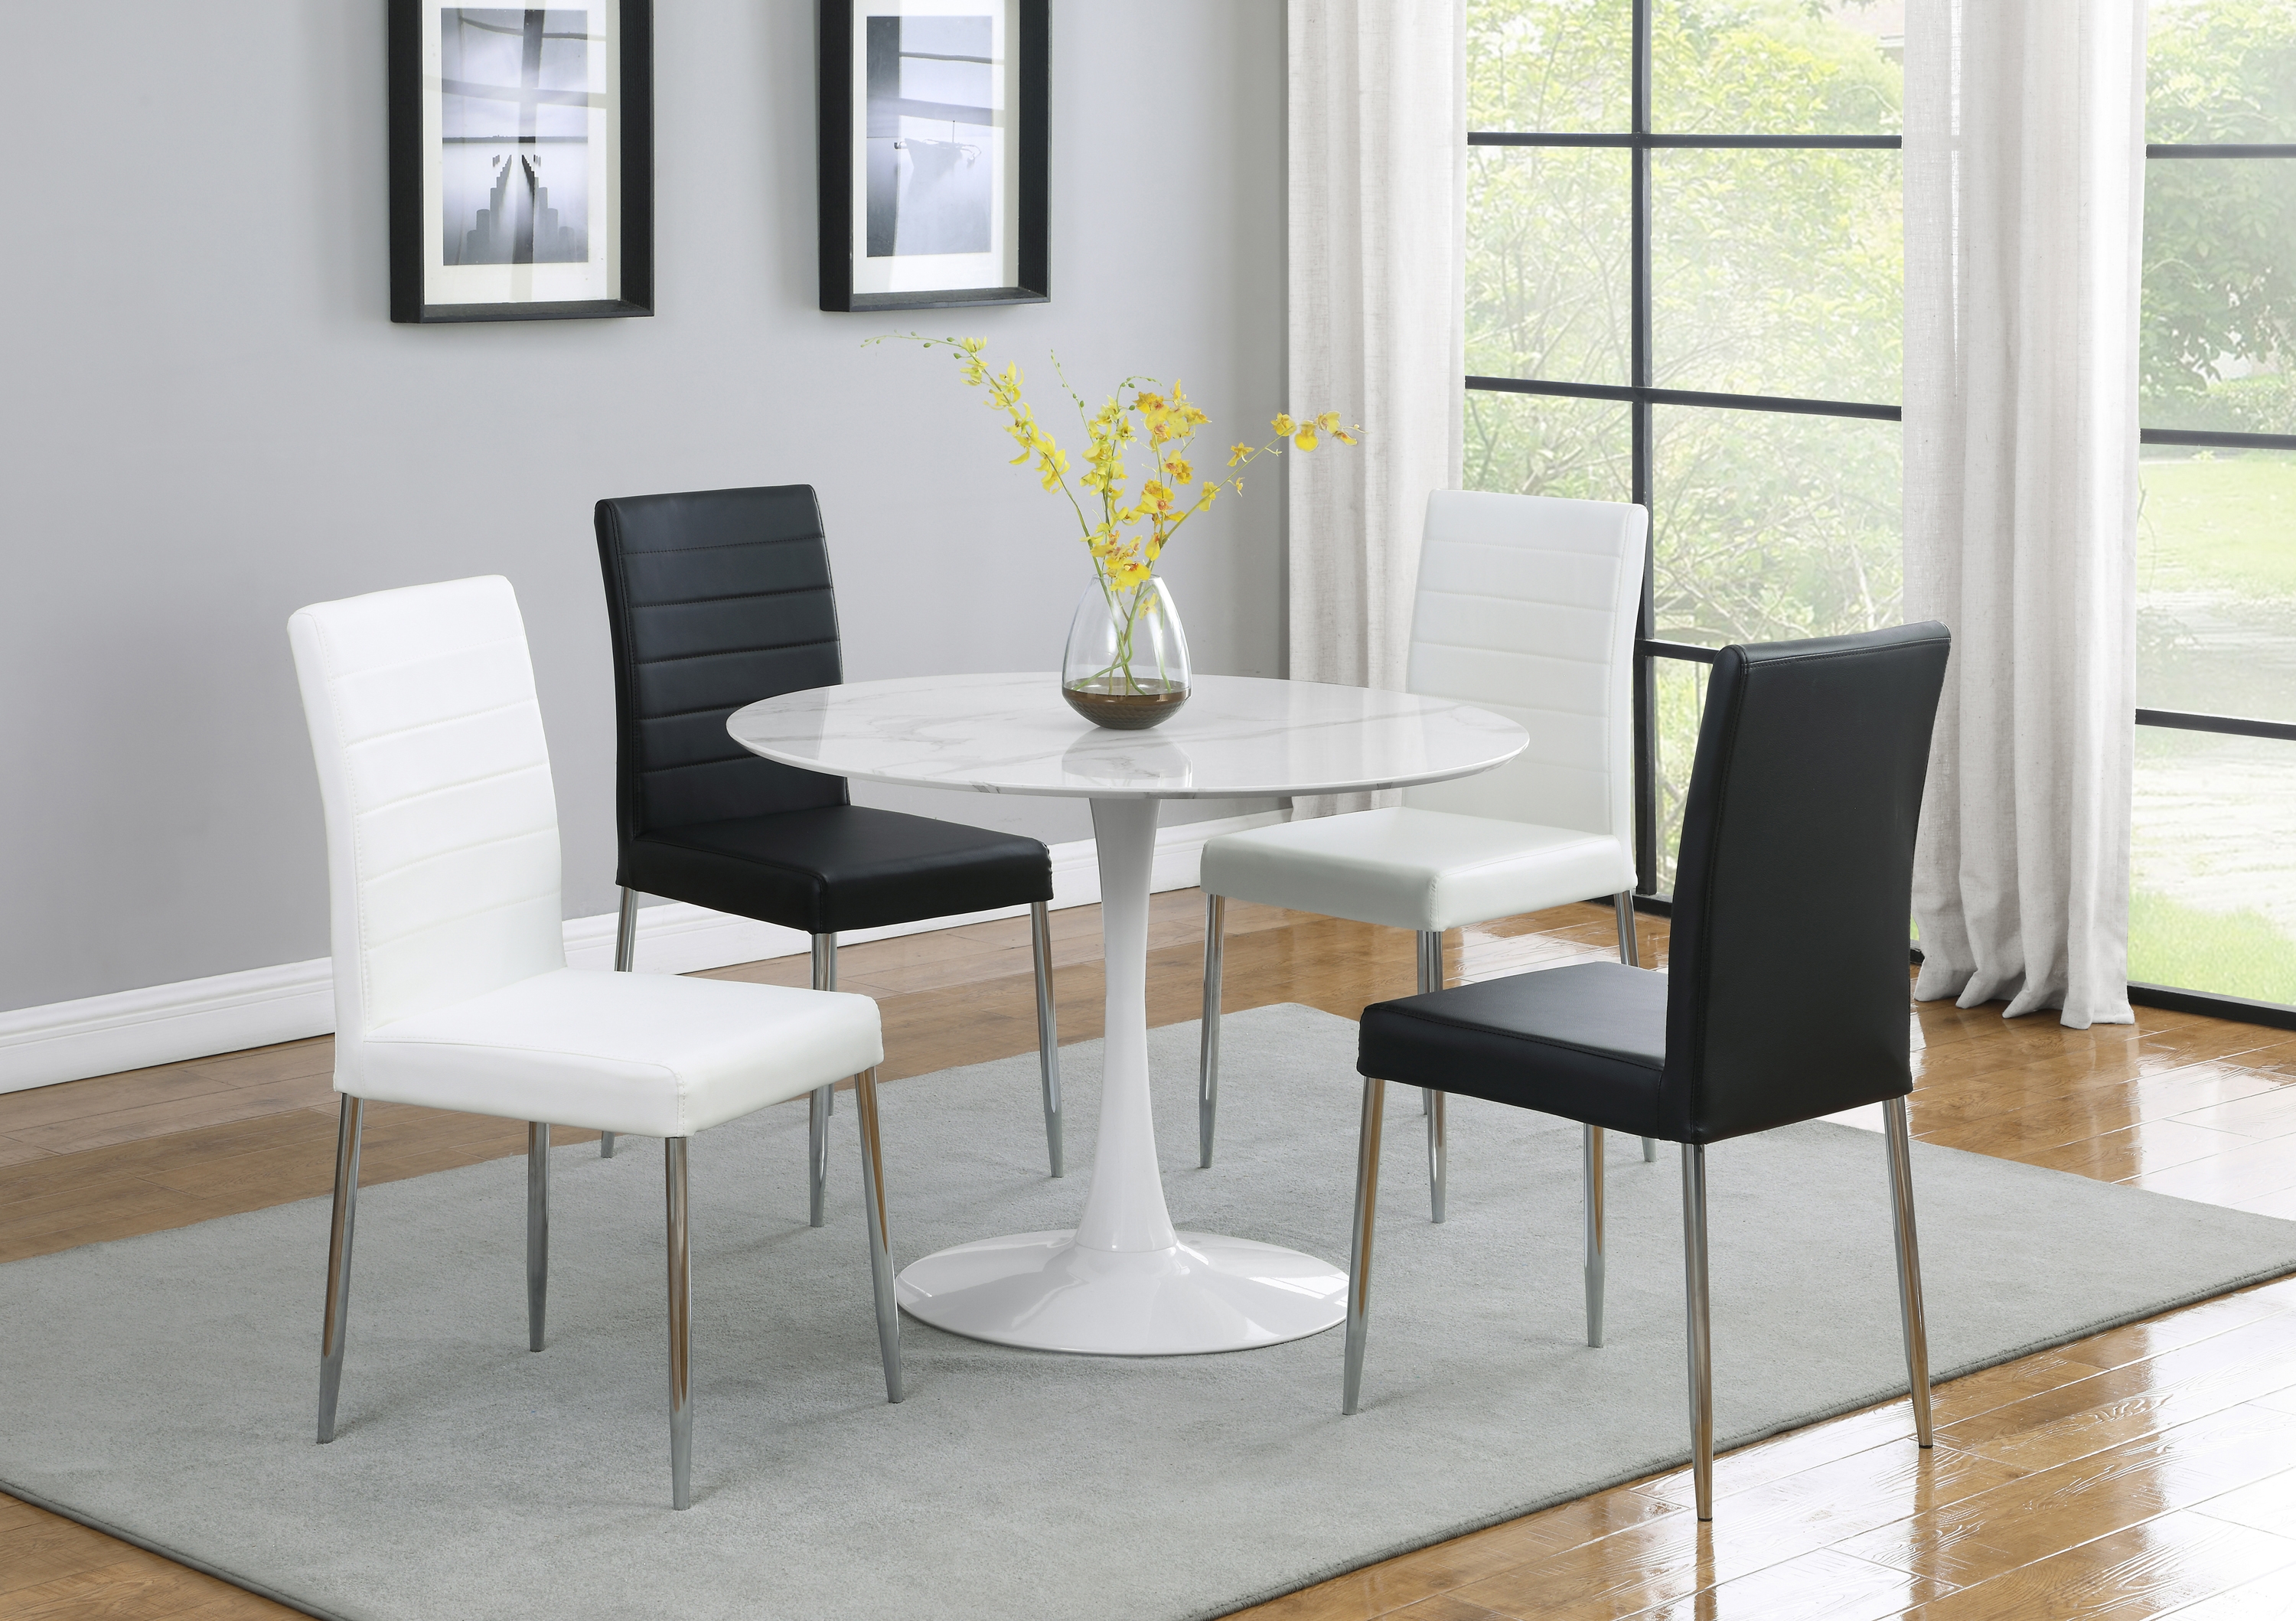 Arkell 40-Inch Round Pedestal Dining Table White - Image 2